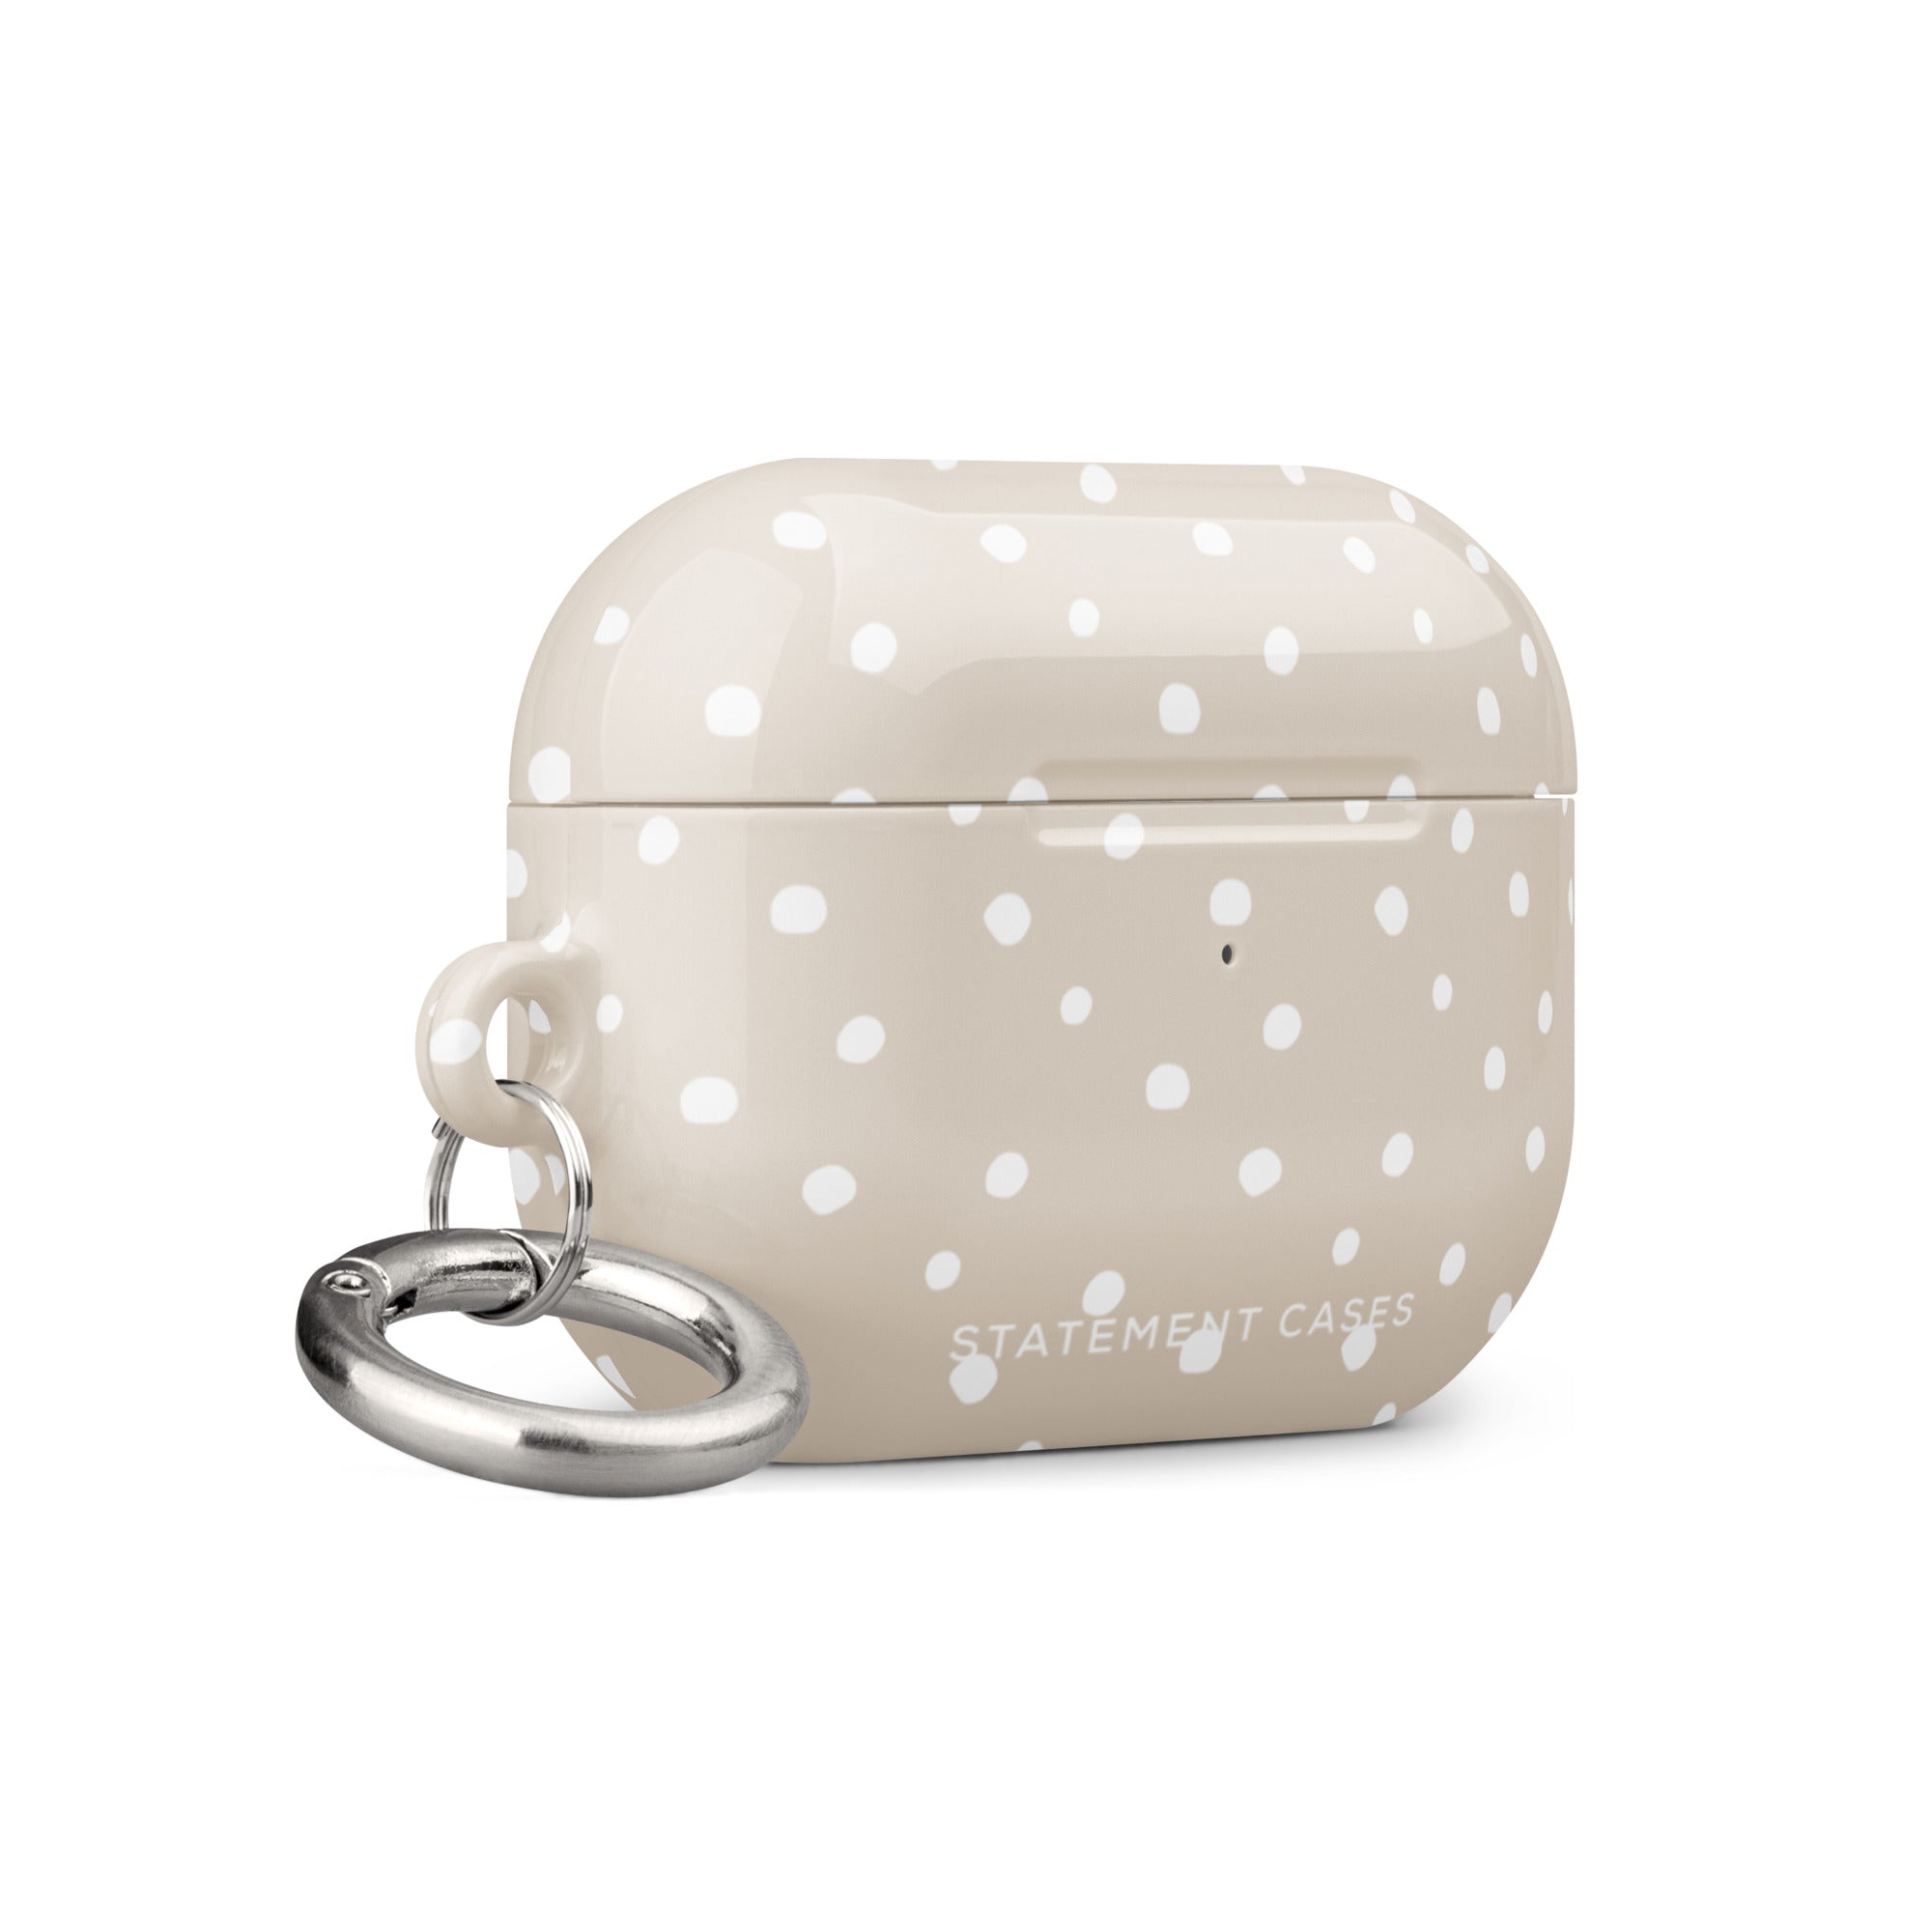 A beige Classic Nude for AirPods Pro Gen 2 case with white polka dots and a small metal carabiner attached to the side, displaying the brand text "Statement Cases.